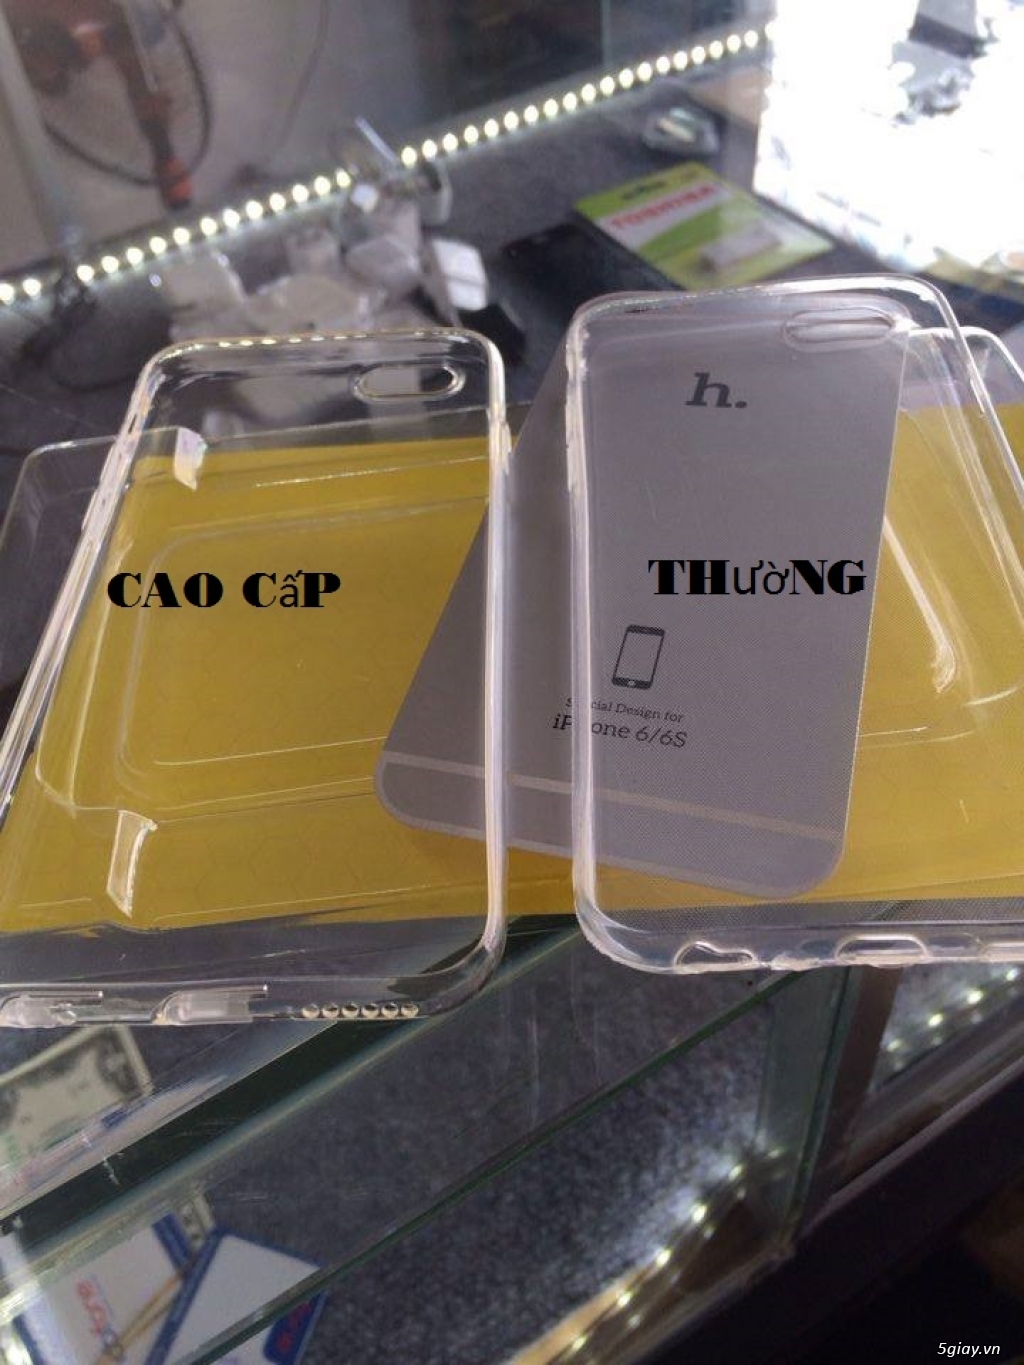 Ốp Silicon Cao cấp Cho Iphone6- 6s plus - 3